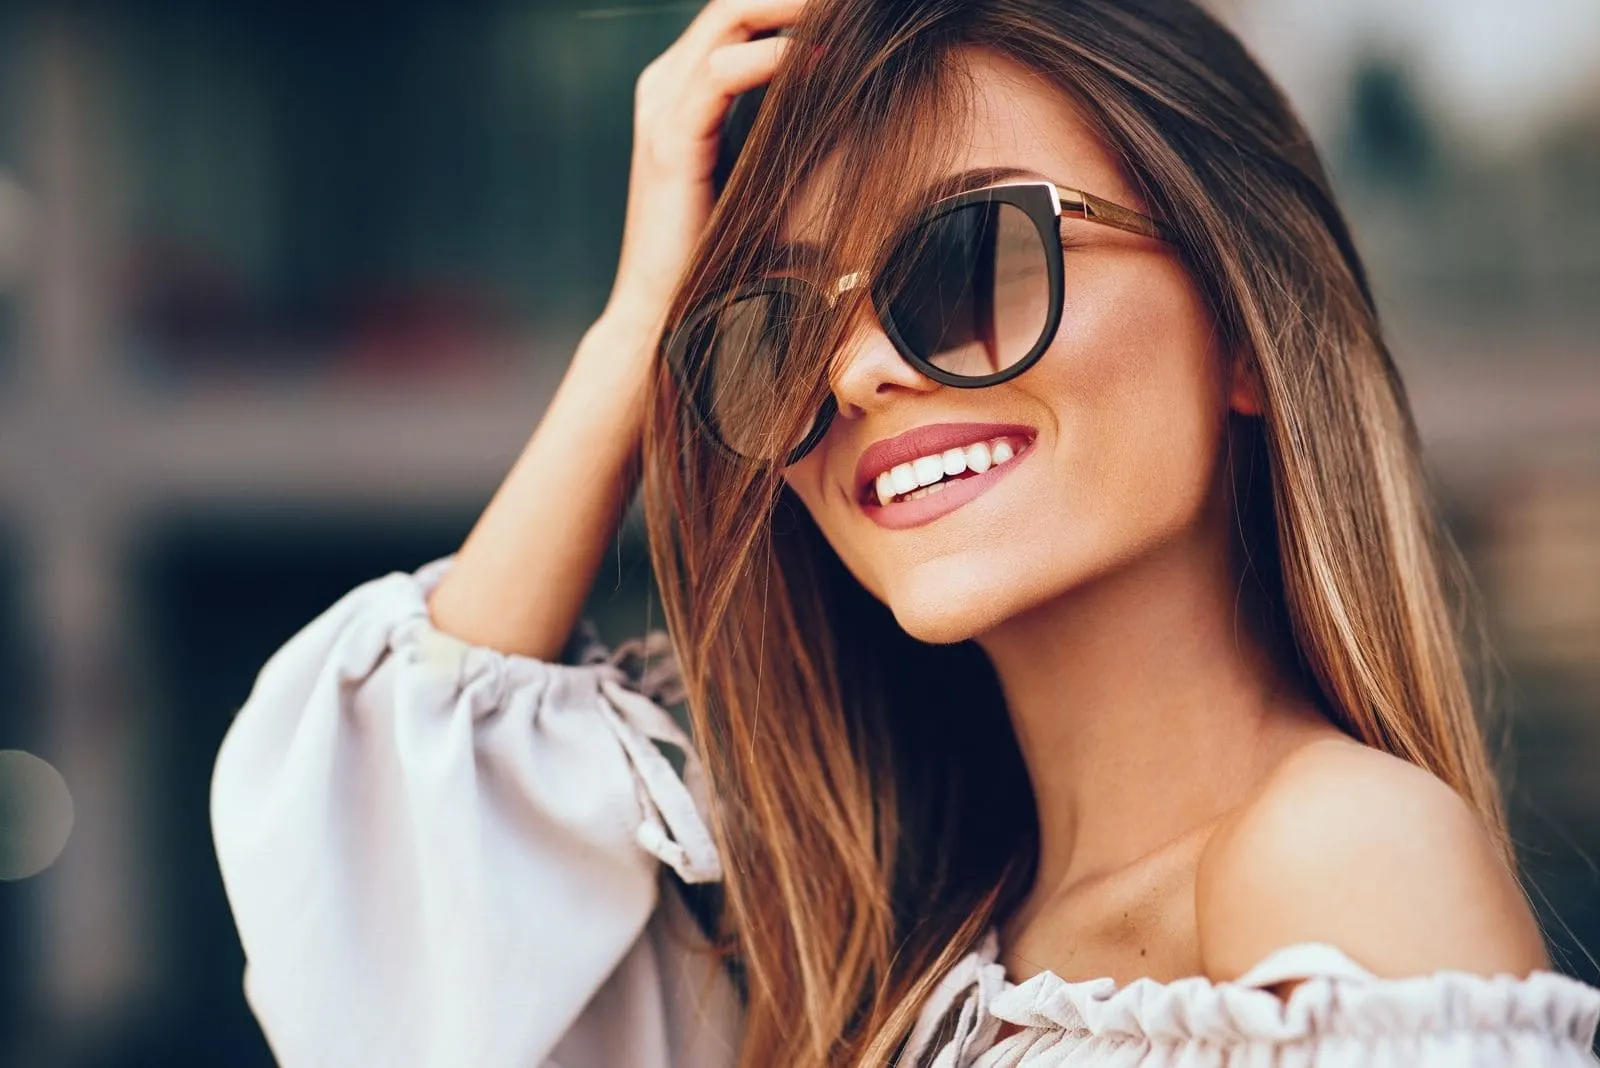 portrait of a beautiful woman smiling wearing a sunglass and holding her head